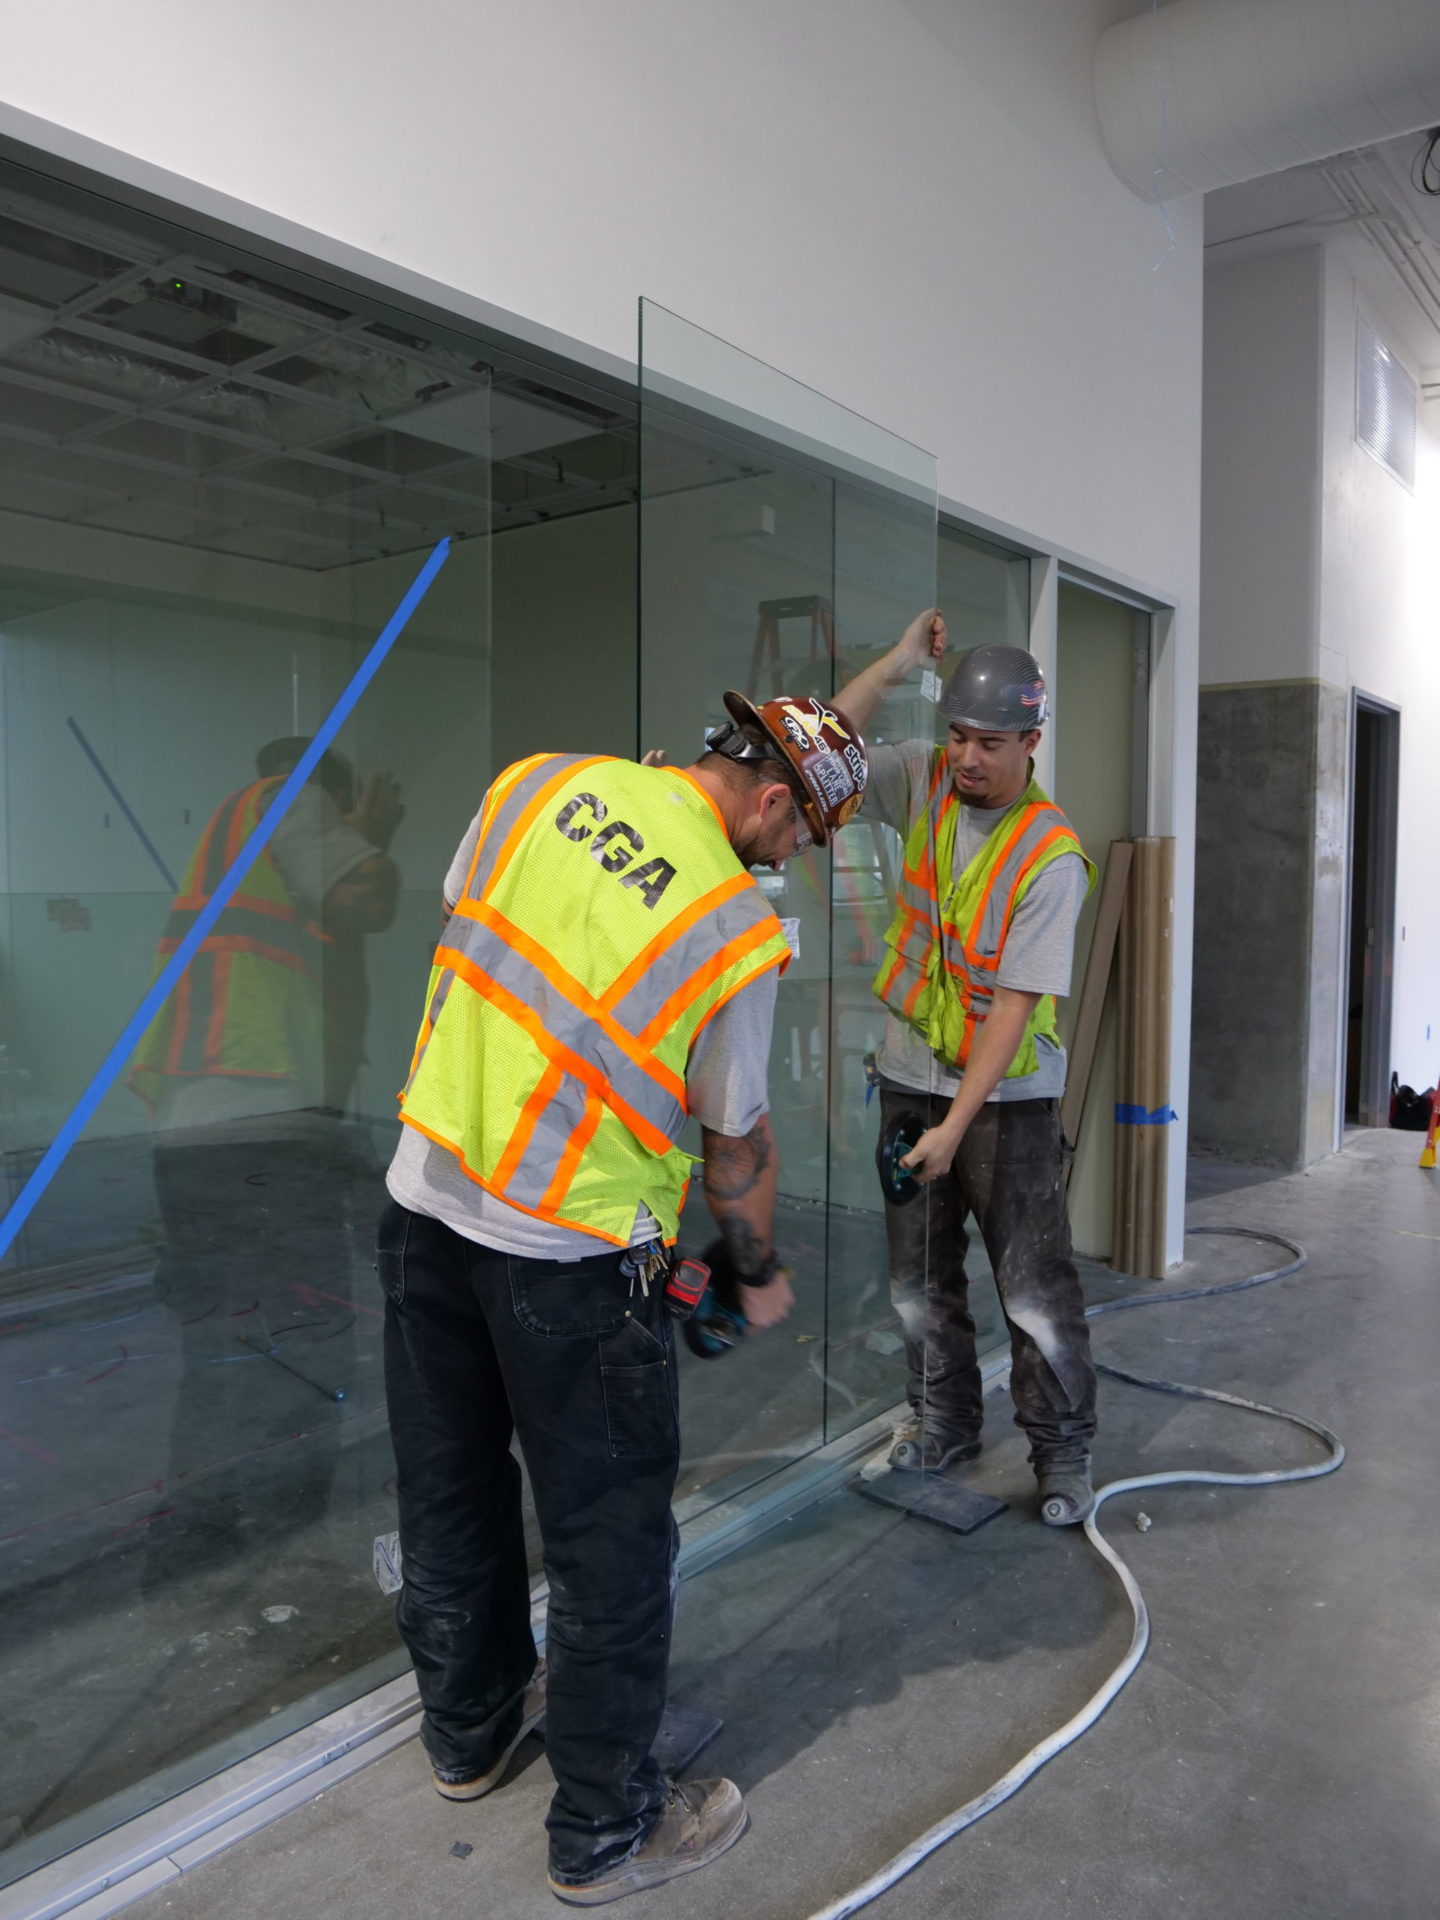 Image from the Gallery: Glaziers 2019